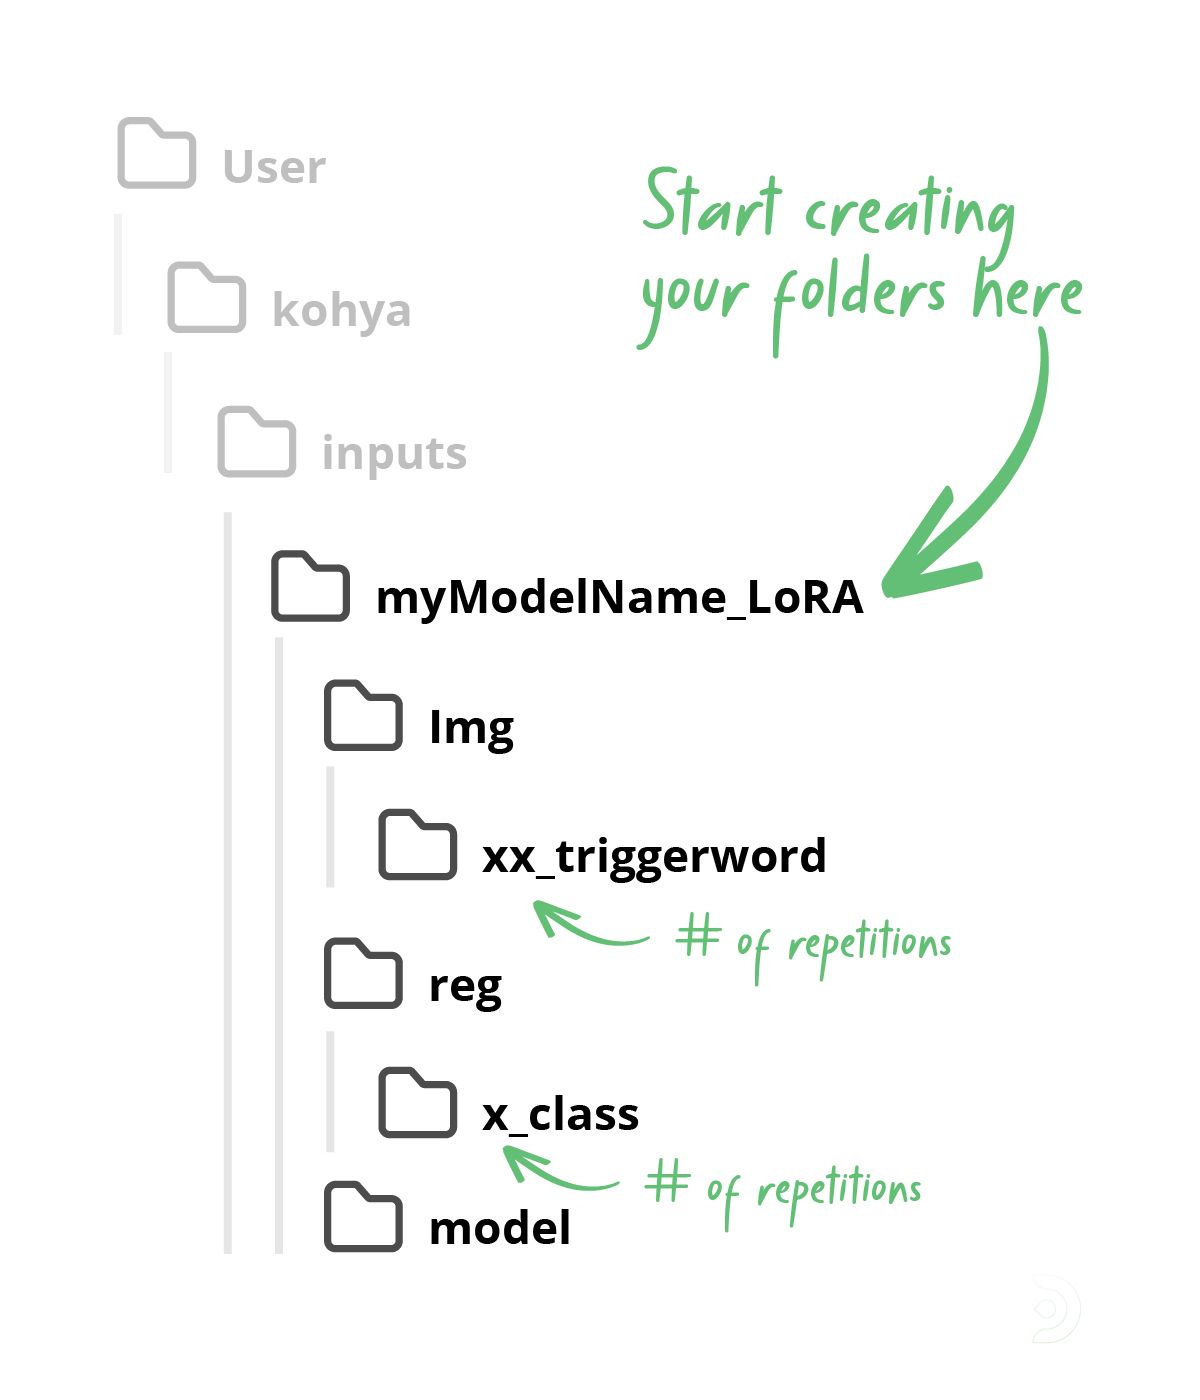 Here's the overall picture of the folder structure we'll be creating in Kohya